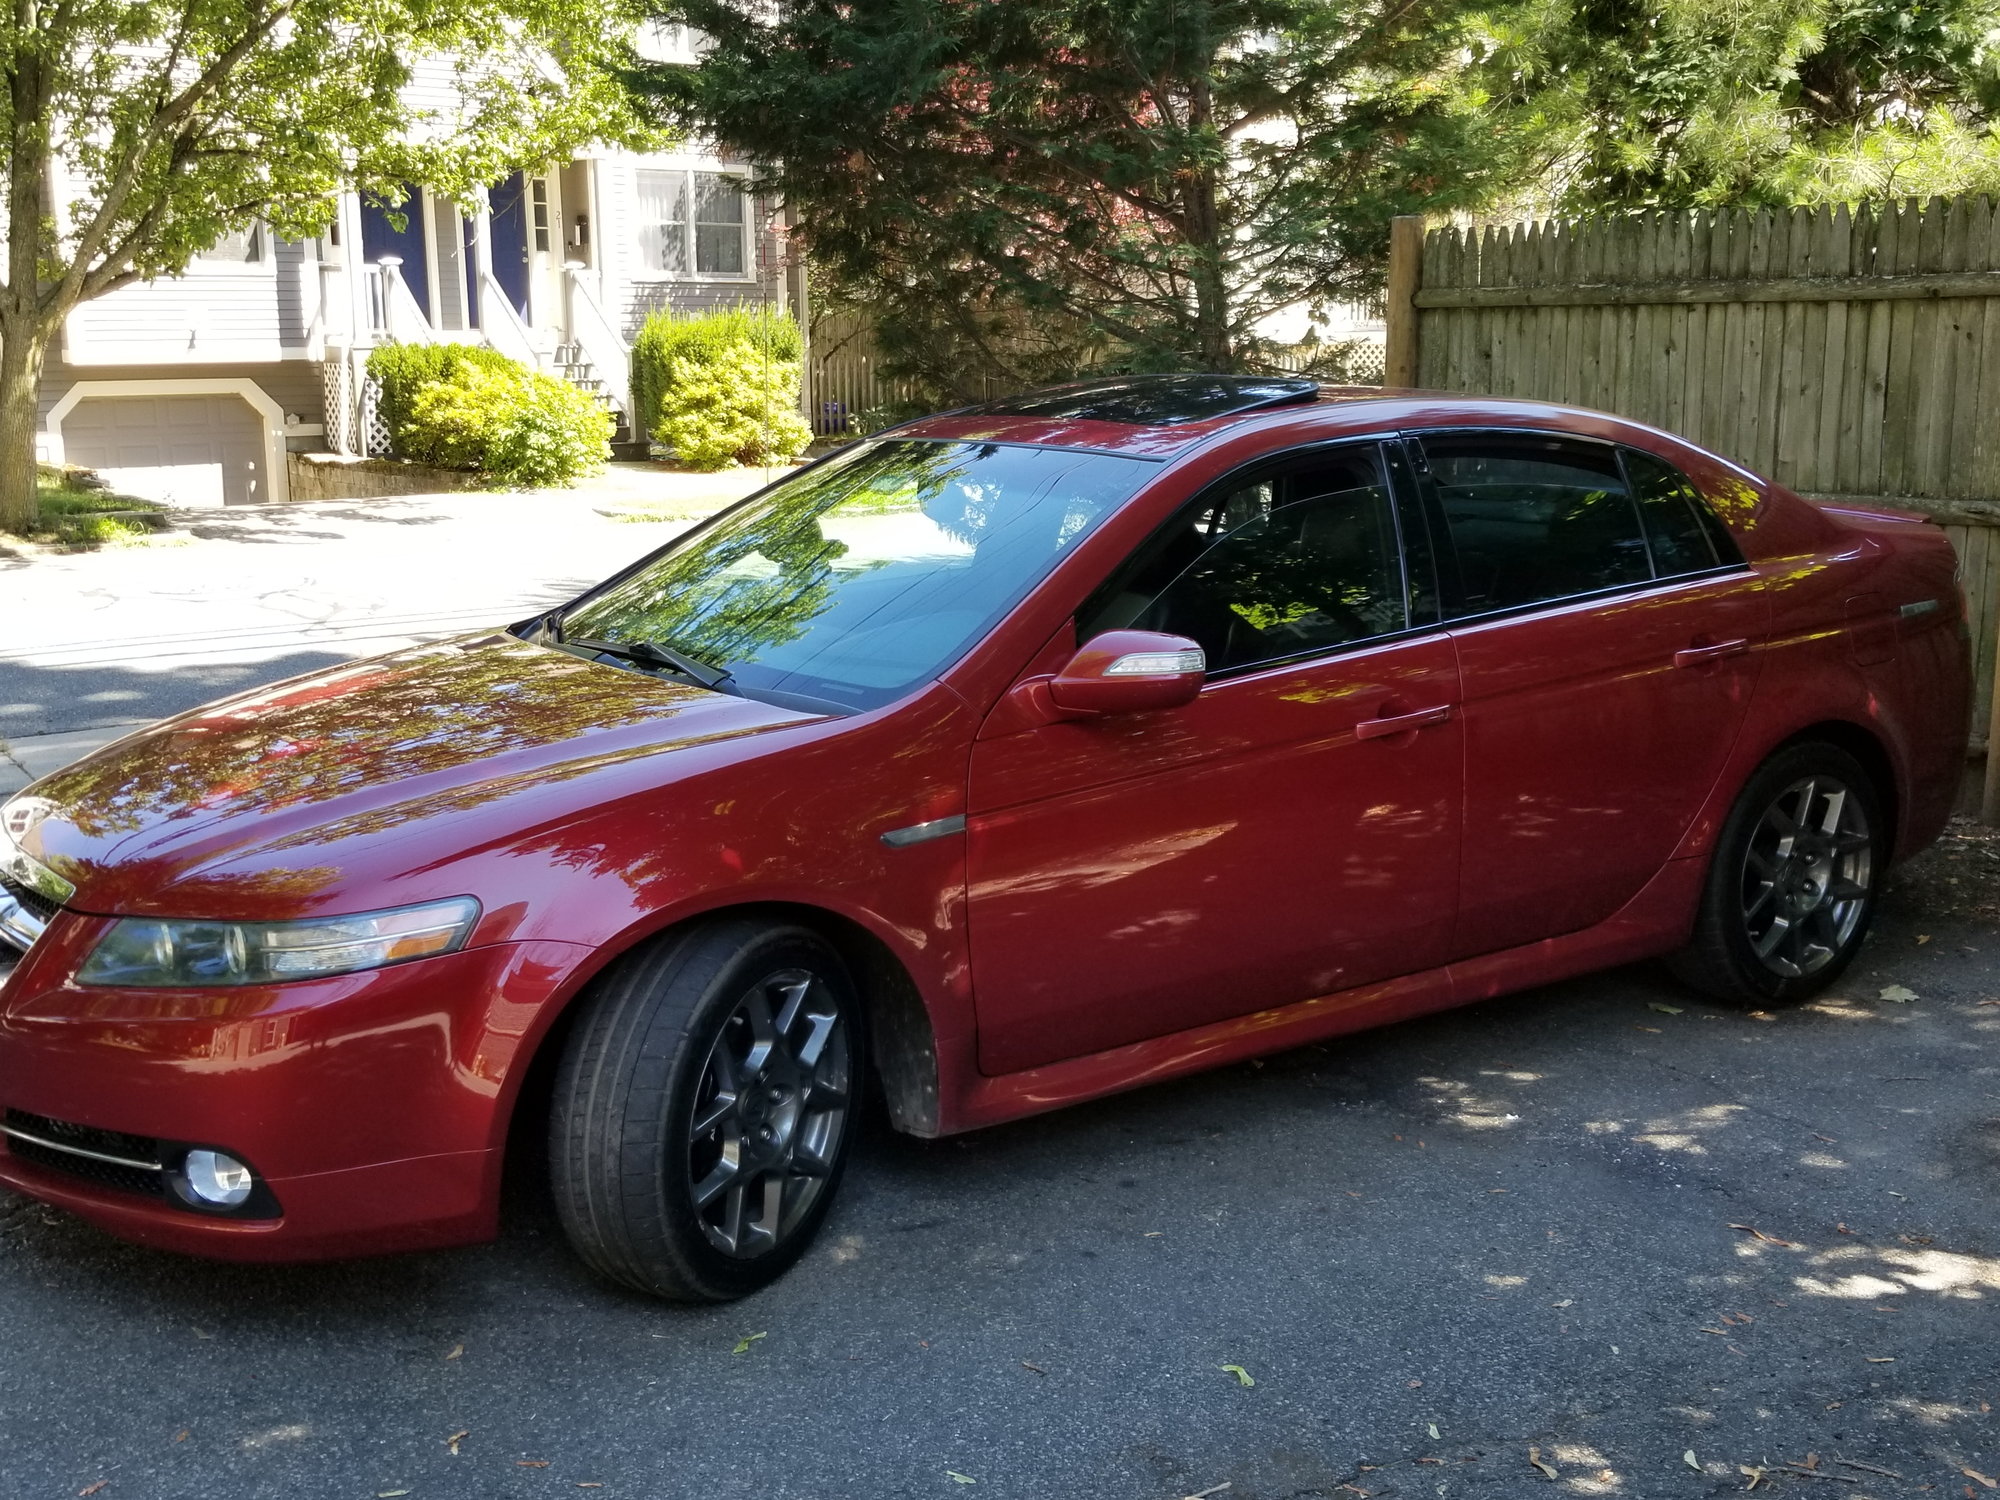 2007 Acura TL - FS: 2007 Acura TL Type-S 6 Speed (Moroccan Red Pearl) - Used - VIN 19UUA75557A043220 - 112,800 Miles - 6 cyl - 2WD - Manual - Sedan - Red - Boston Area, MA 02108, United States